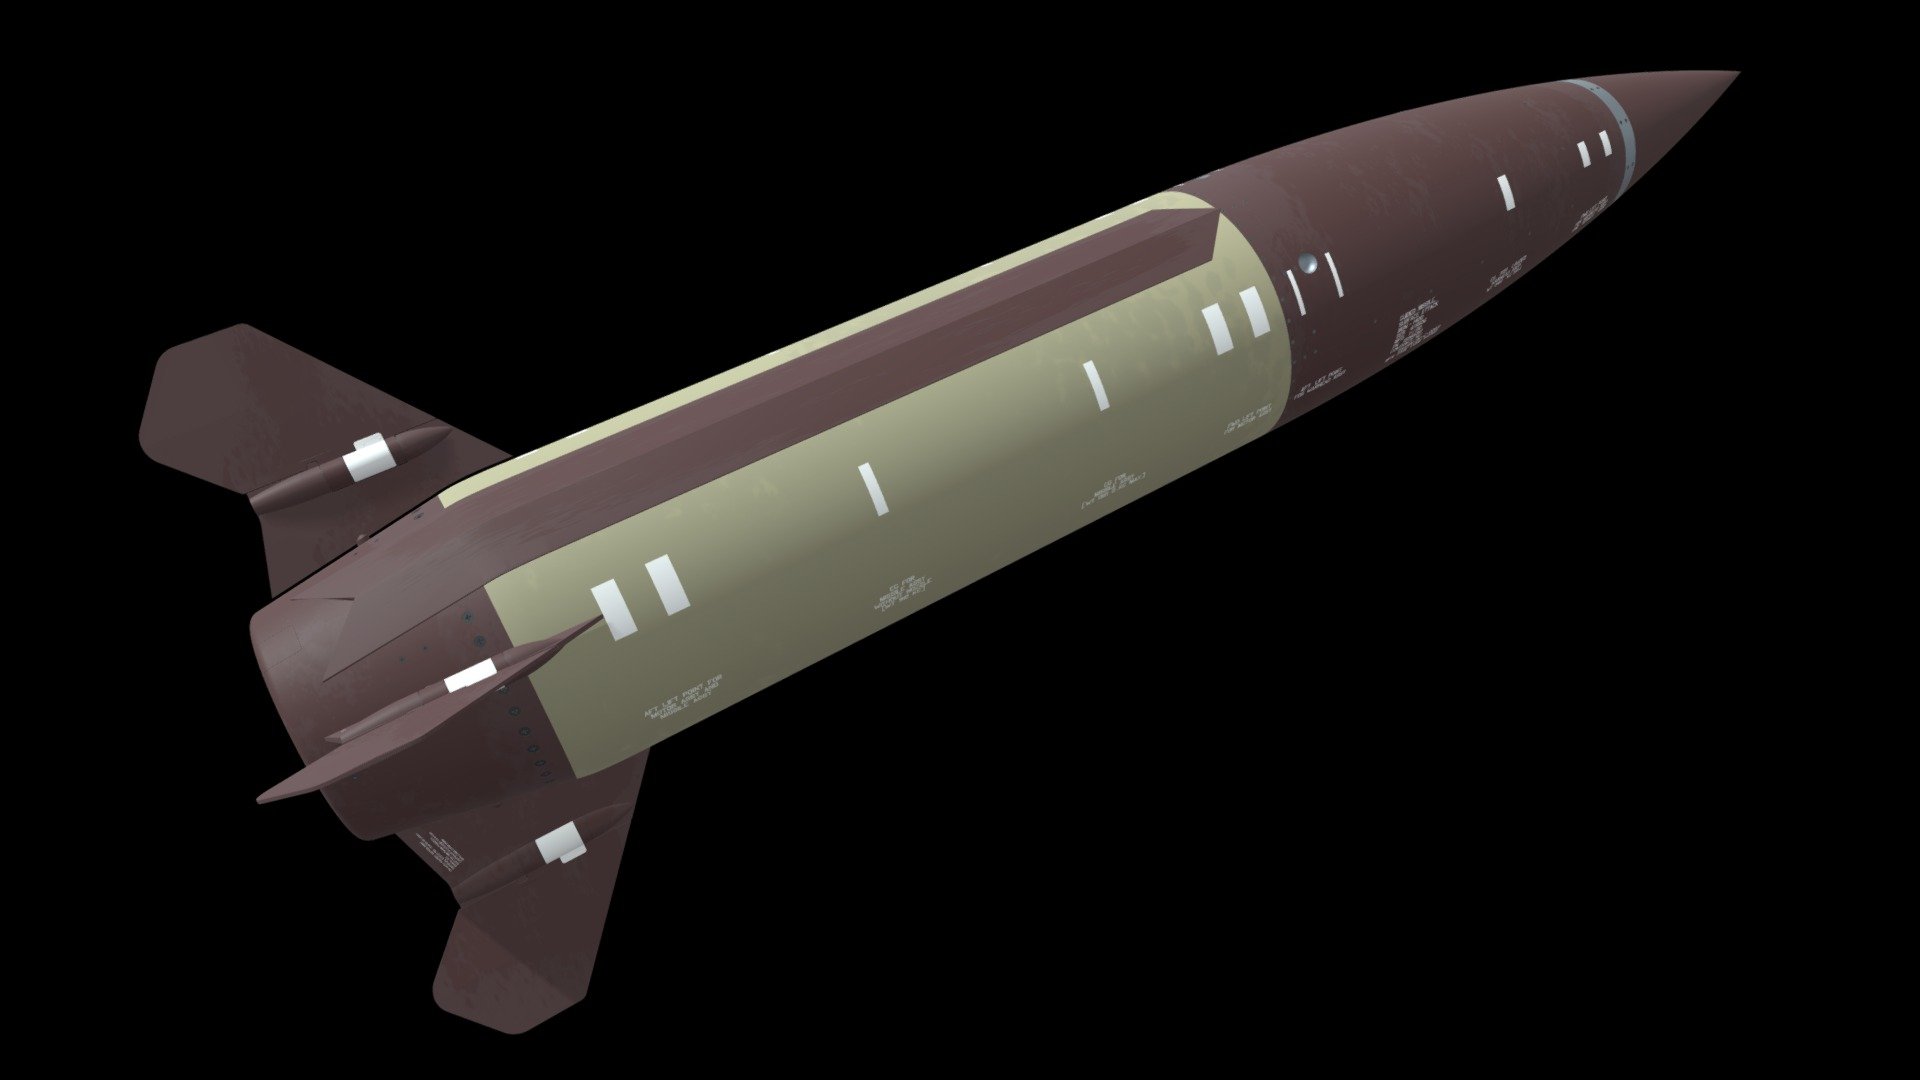 The MGM-140 Army Tactical Missile System (ATACMS) is a surface-to-surface missile (SSM) manufactured by the U.S. defense company Lockheed Martin. It has a range of over 100 miles (160 km), with solid propellant, and is 13 feet (4.0 m) high and 24 inches (610 mm) in diameter.
This model is presented with a two-color scheme

The ATACMS can be fired from multiple rocket launchers, including the M270 Multiple Launch Rocket System (MLRS), and M142 High Mobility Artillery Rocket System (HIMARS).
(Wikipedia).
The model was built using information, photos an image from internet, therefore its dimensions and details are not precise.
It is an inaccurate representation and not a correctly engineered model.
Thanks to Jeyhun Pashayev for the photos - MGM-140 MARKINGS-01 - 3D model by Edgar Brito (@e.brito) 3d model